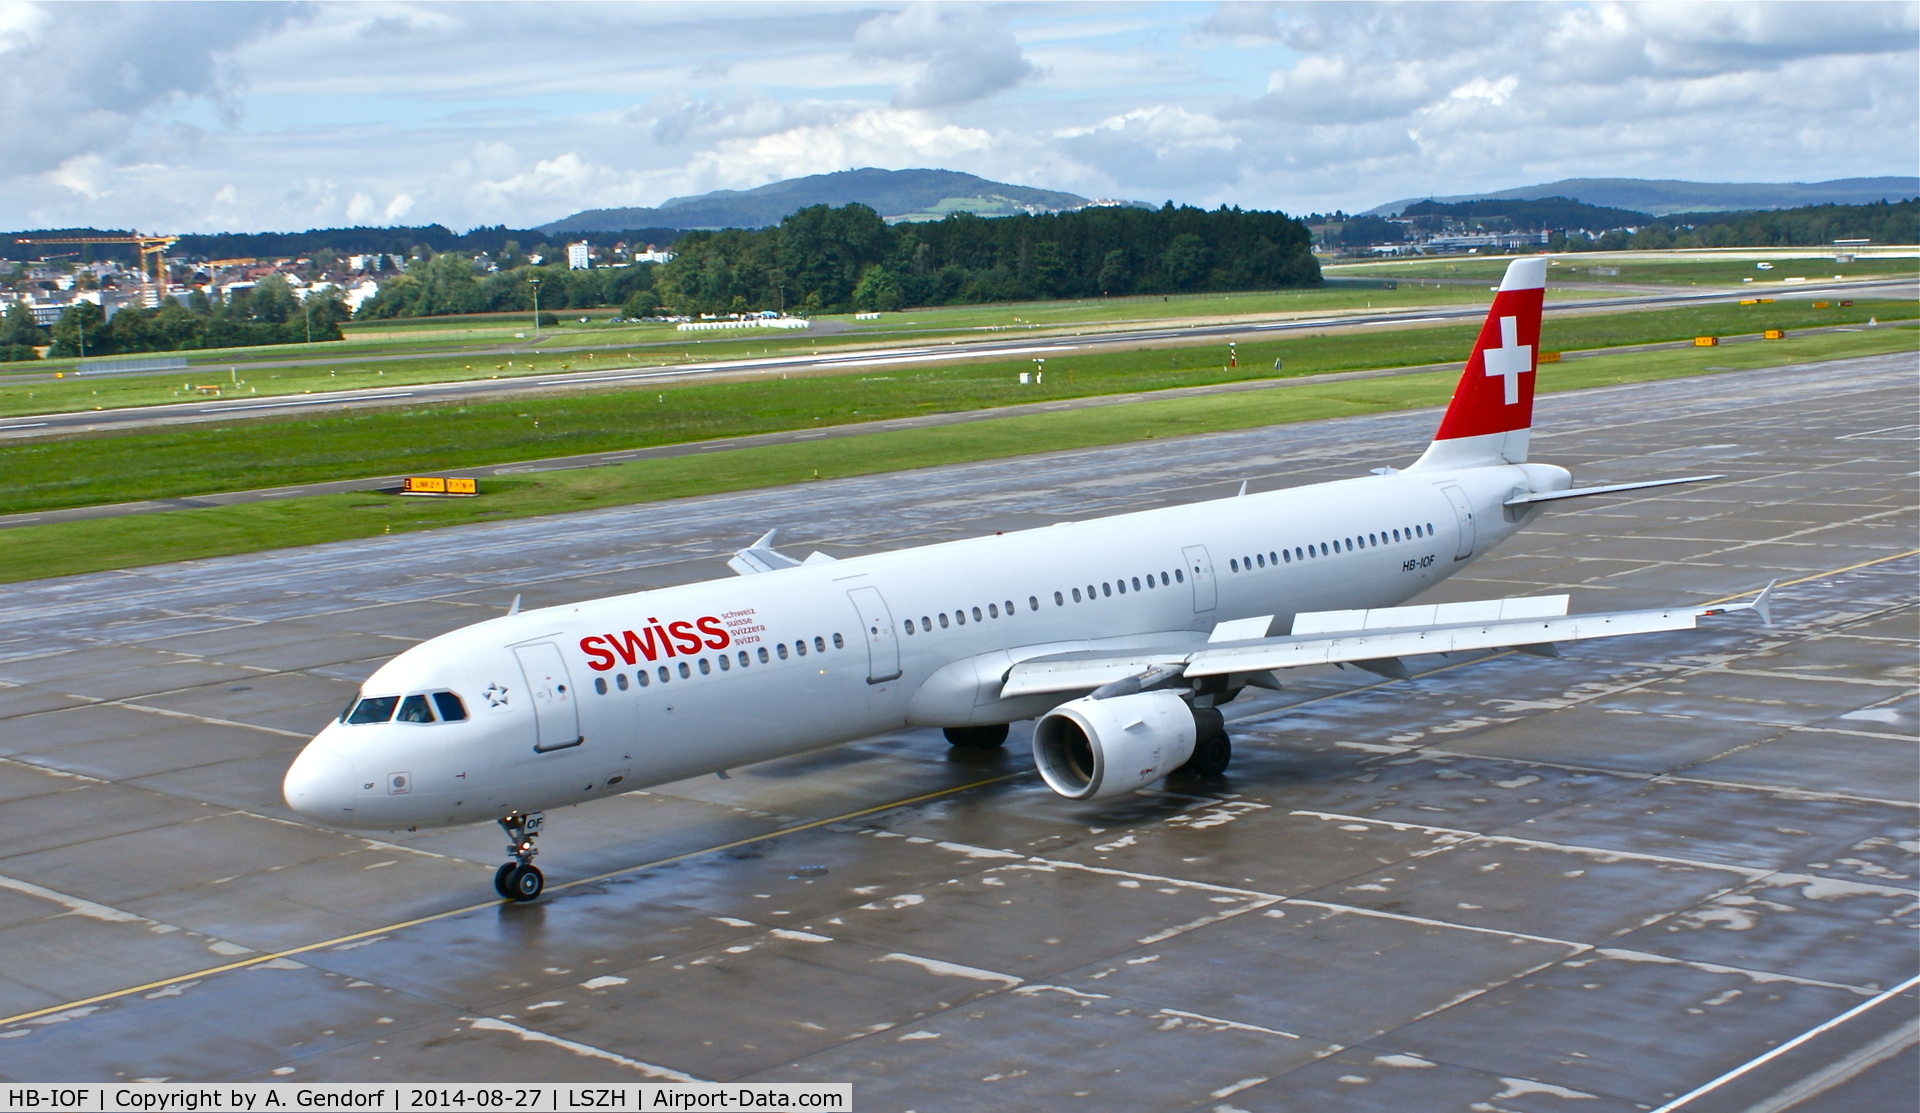 HB-IOF, 1995 Airbus A321-111 C/N 541, Swiss, is here taxiing to the gate at Zürich-Kloten(LSZH)